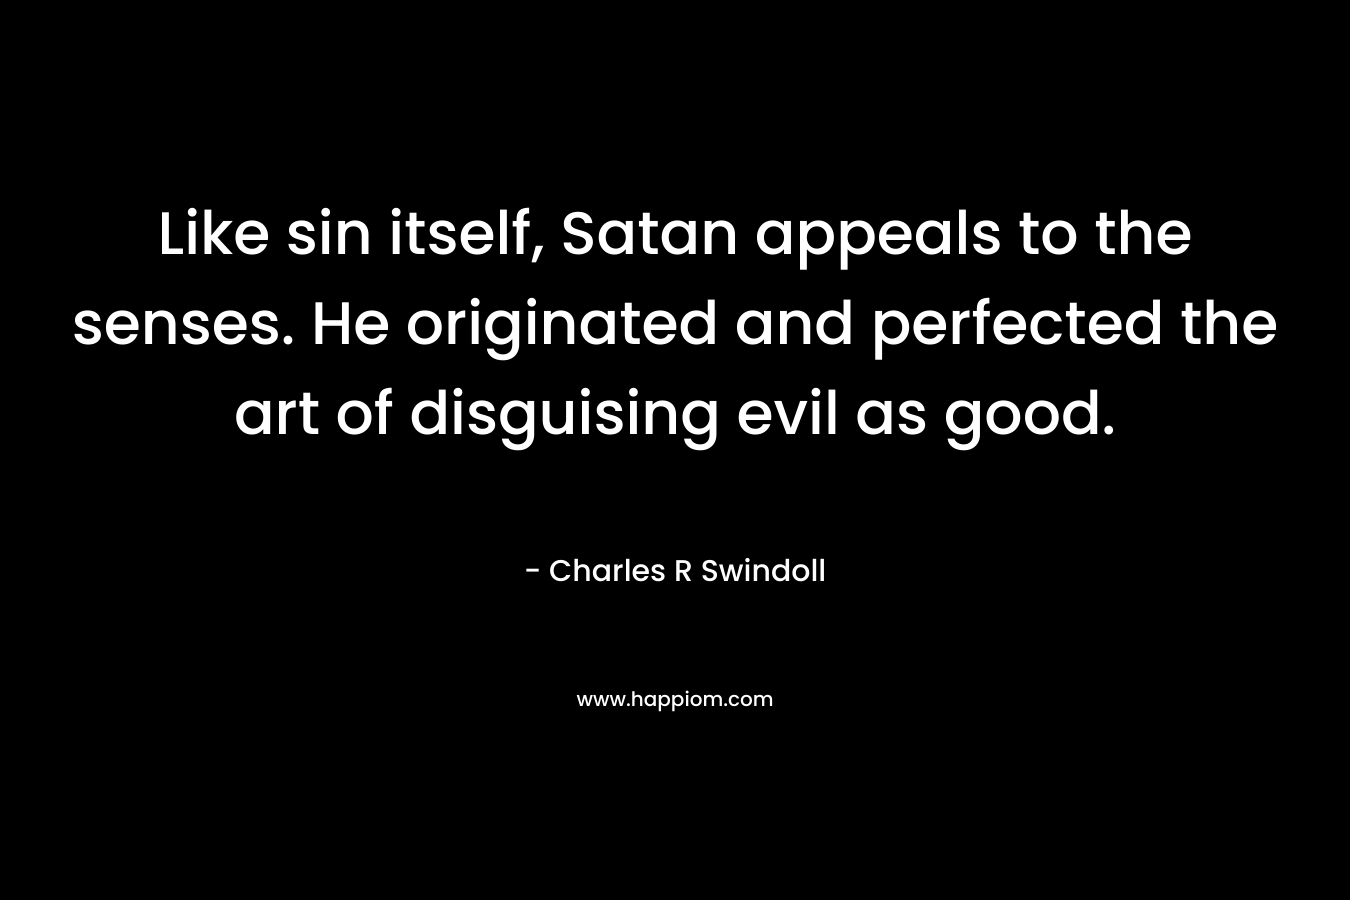 Like sin itself, Satan appeals to the senses. He originated and perfected the art of disguising evil as good. – Charles R Swindoll